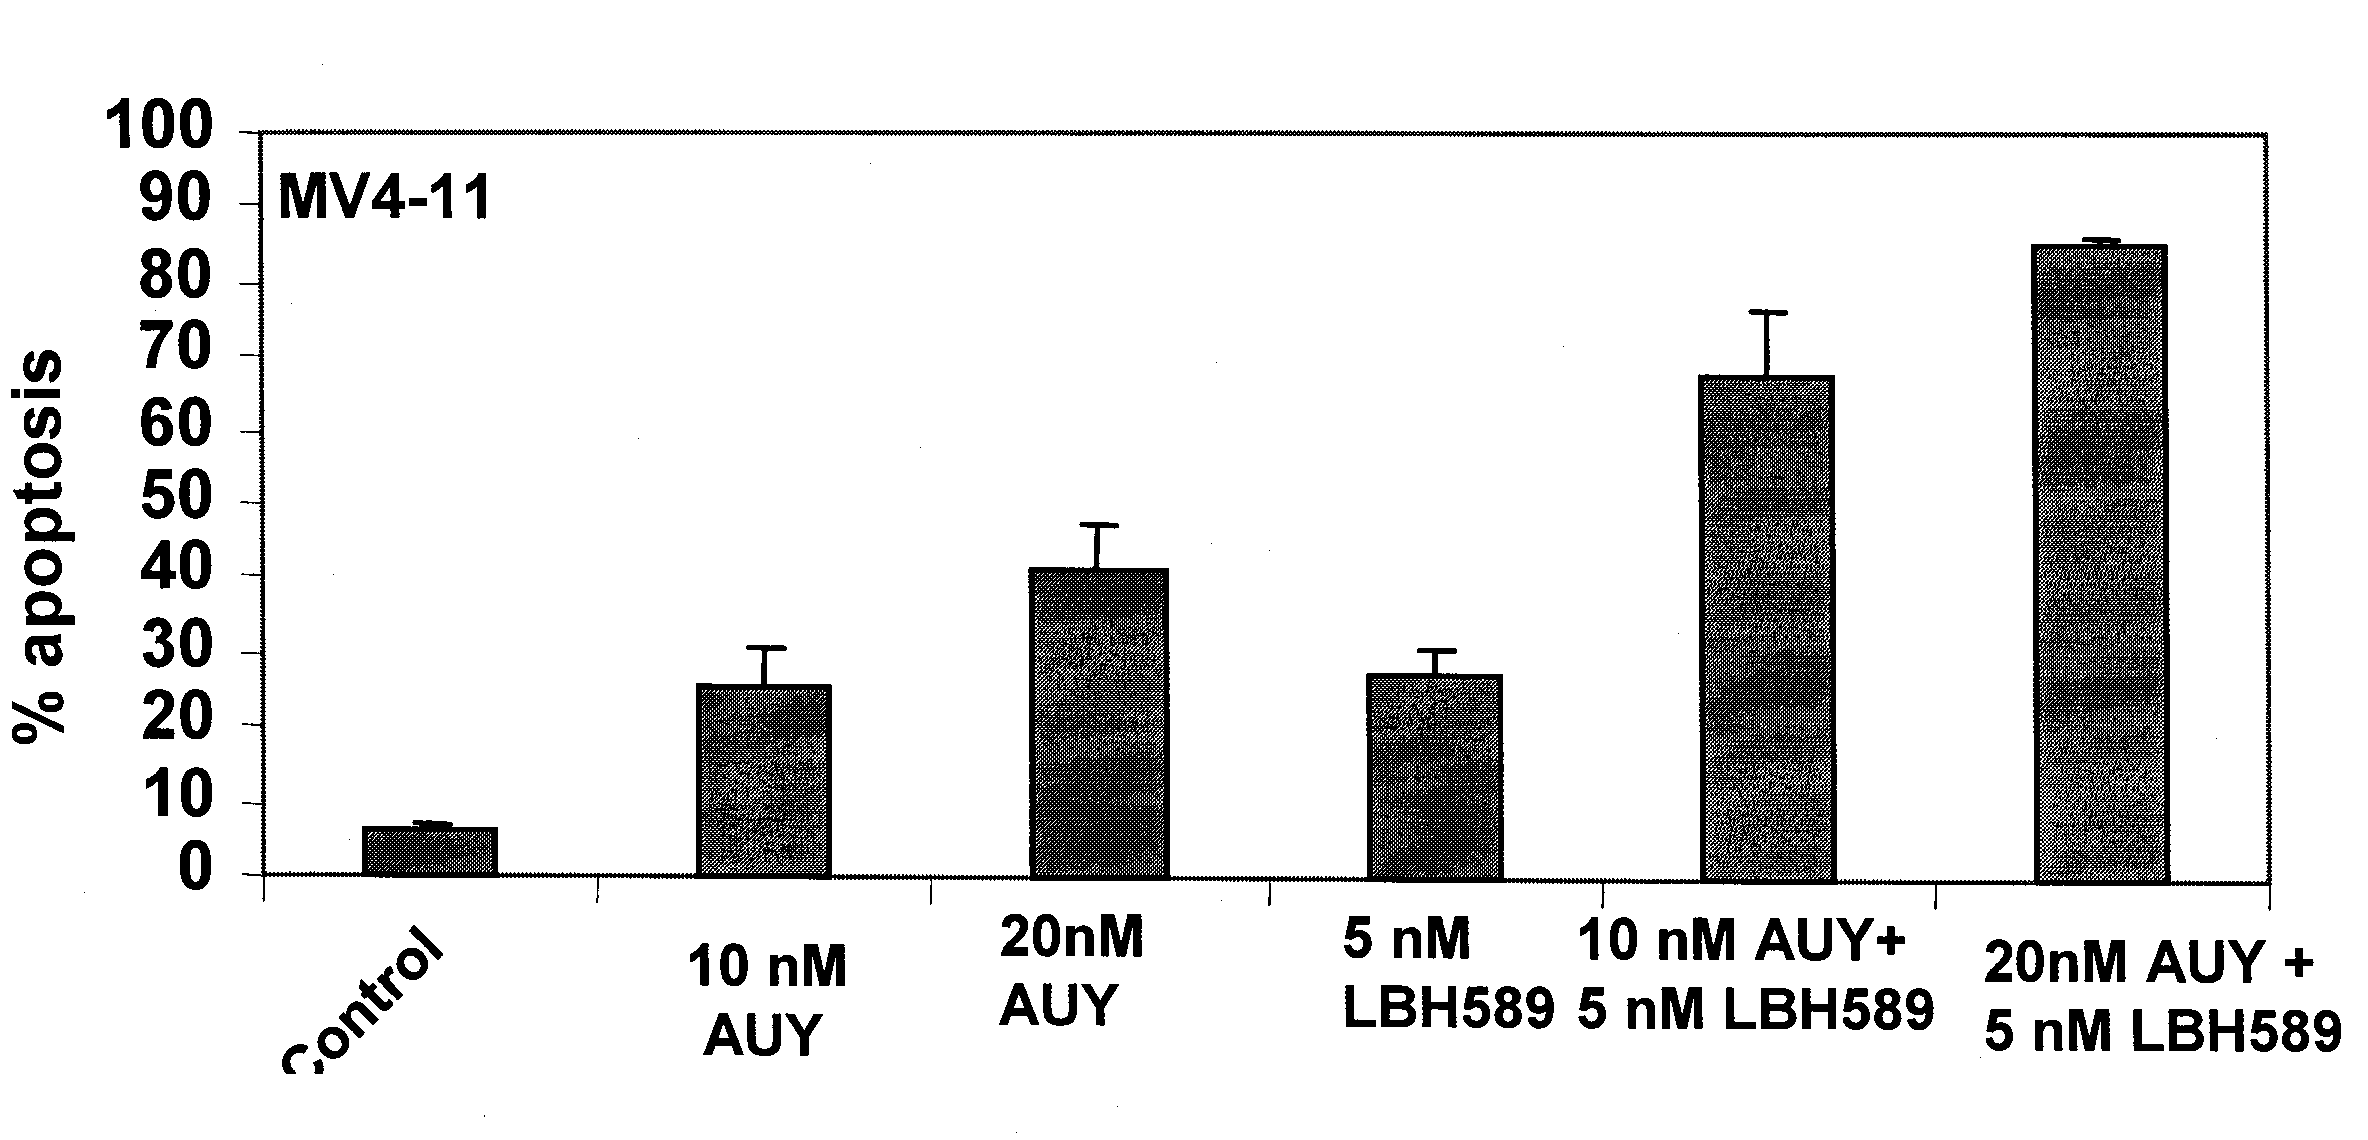 Combination of lbh589 with other therapeutic agents for treating cancer